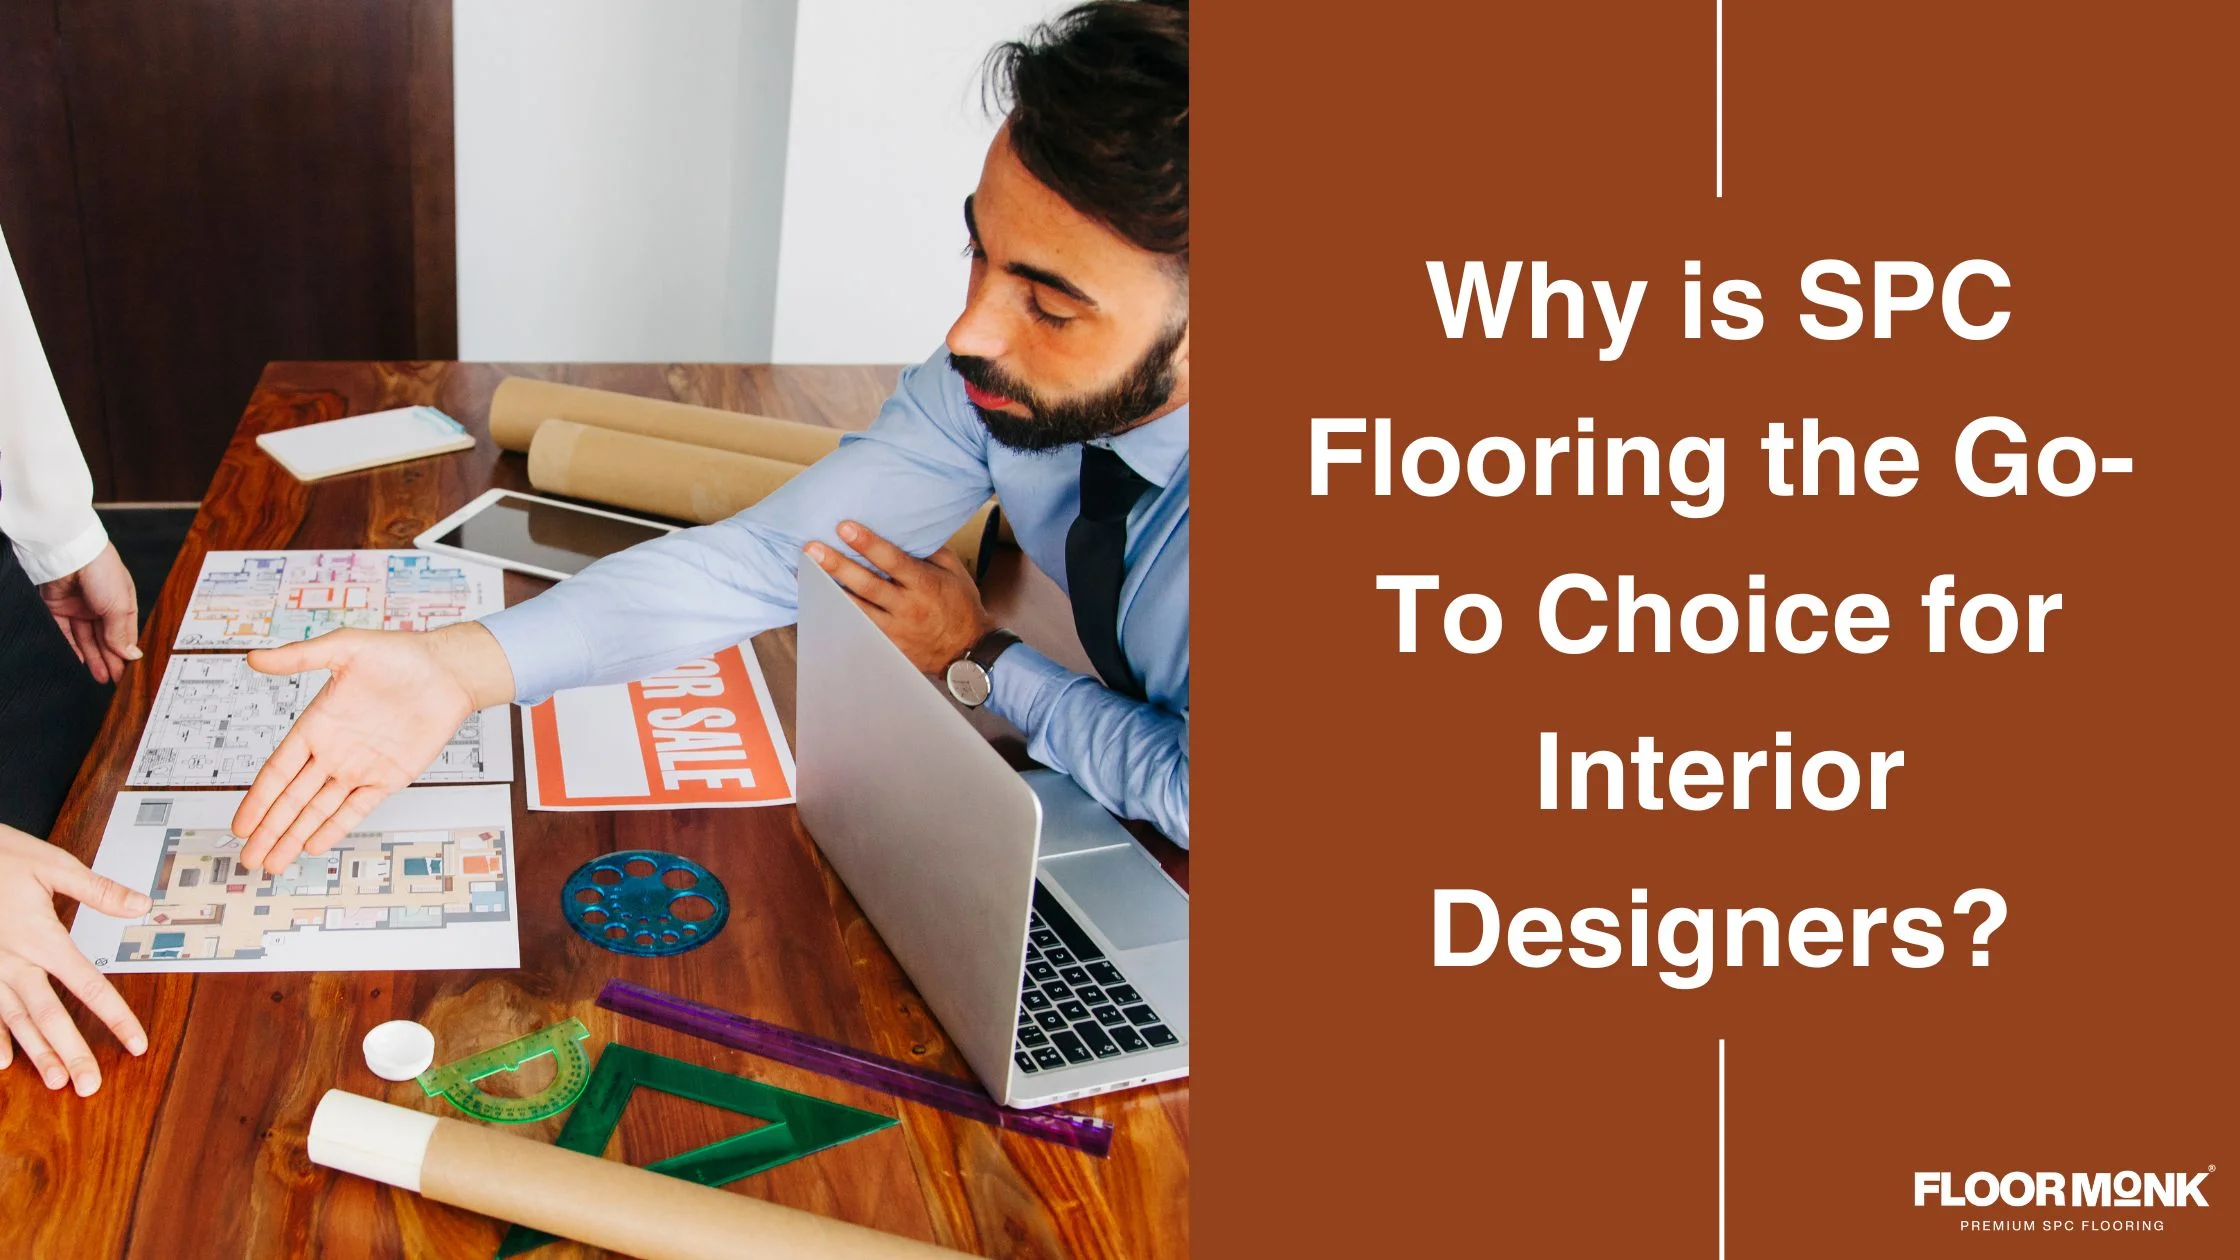 Why Is SPC Flooring The Go-To Choice For Interior Designers?